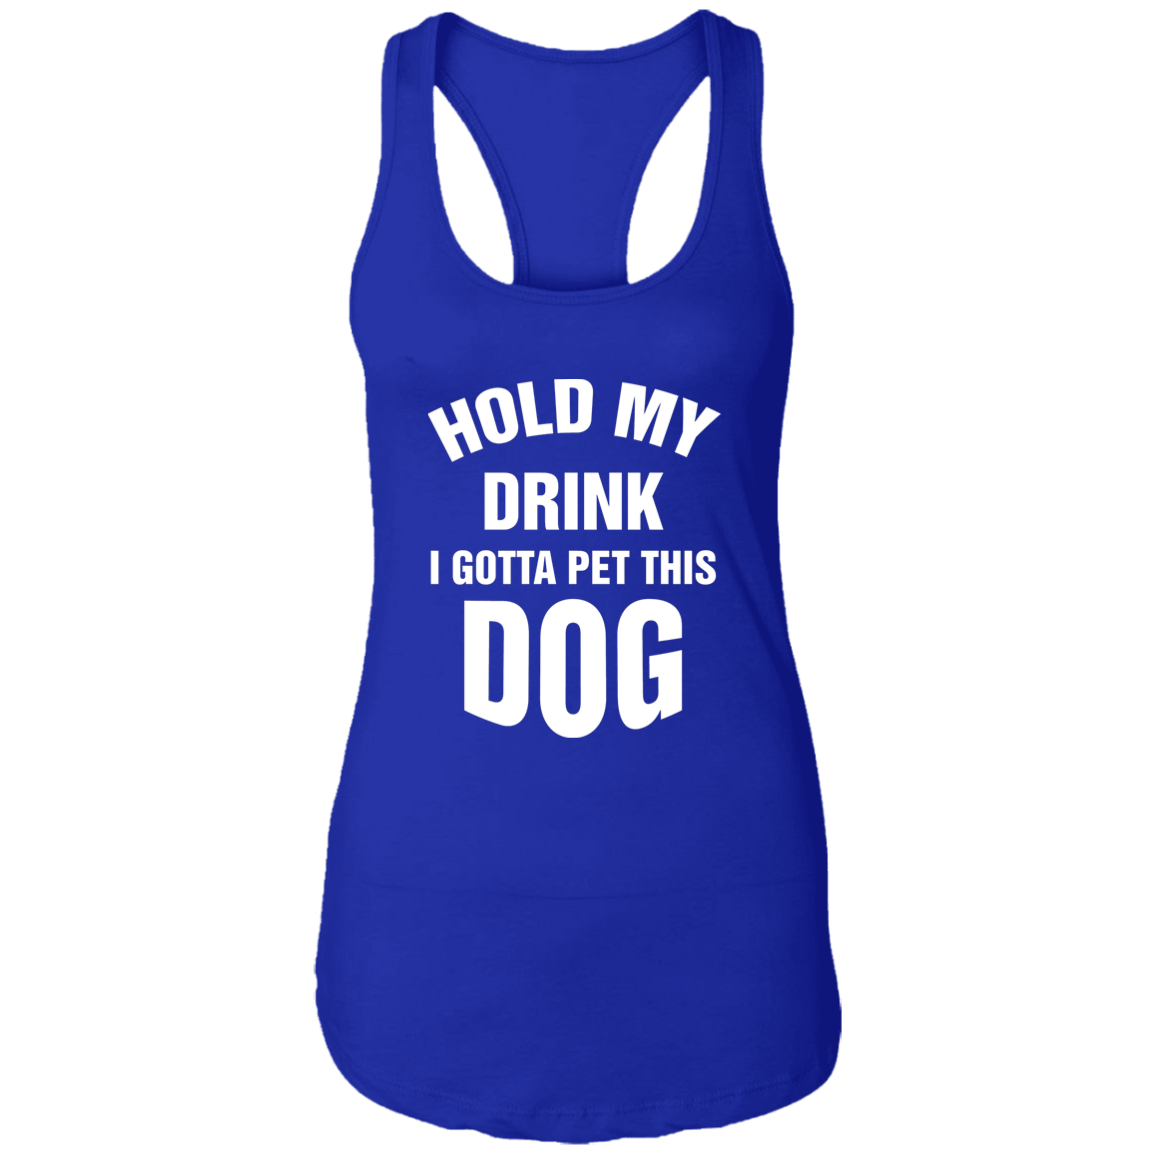 Hold My Drink - Ladies Racer Back Tank.